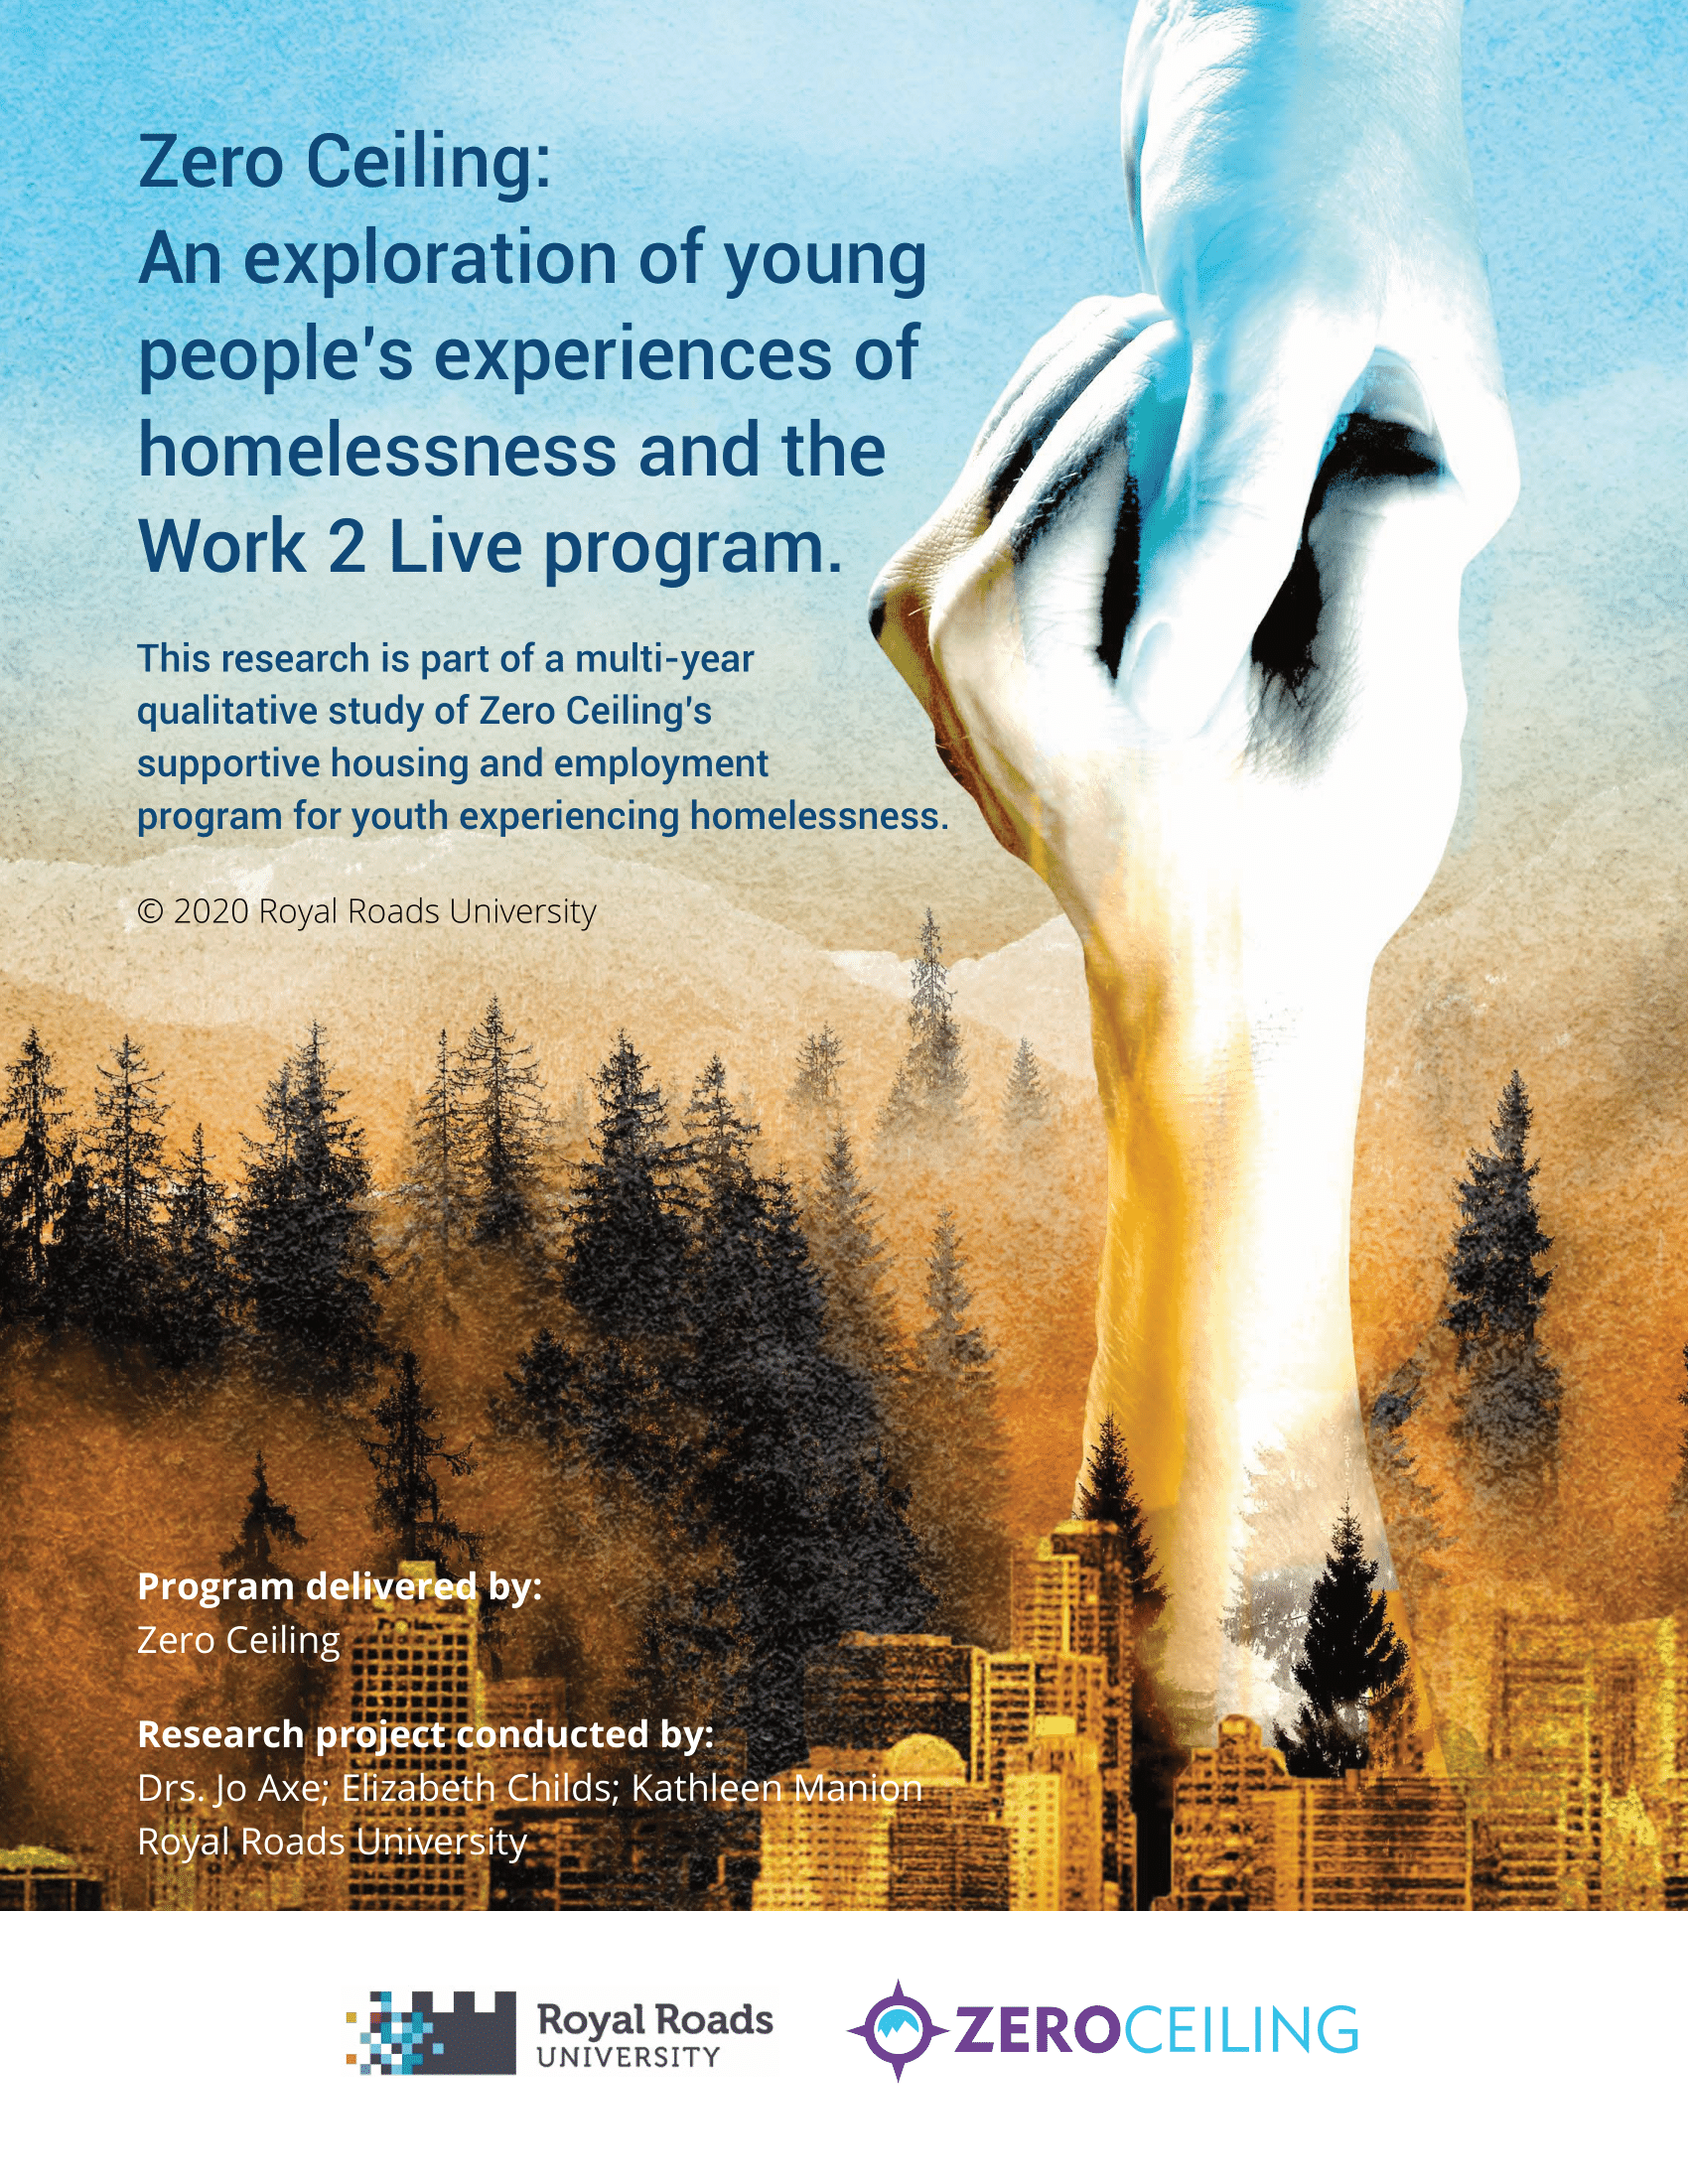 An exploration of young people’s experiences of homelessness and the Work 2 Live program.